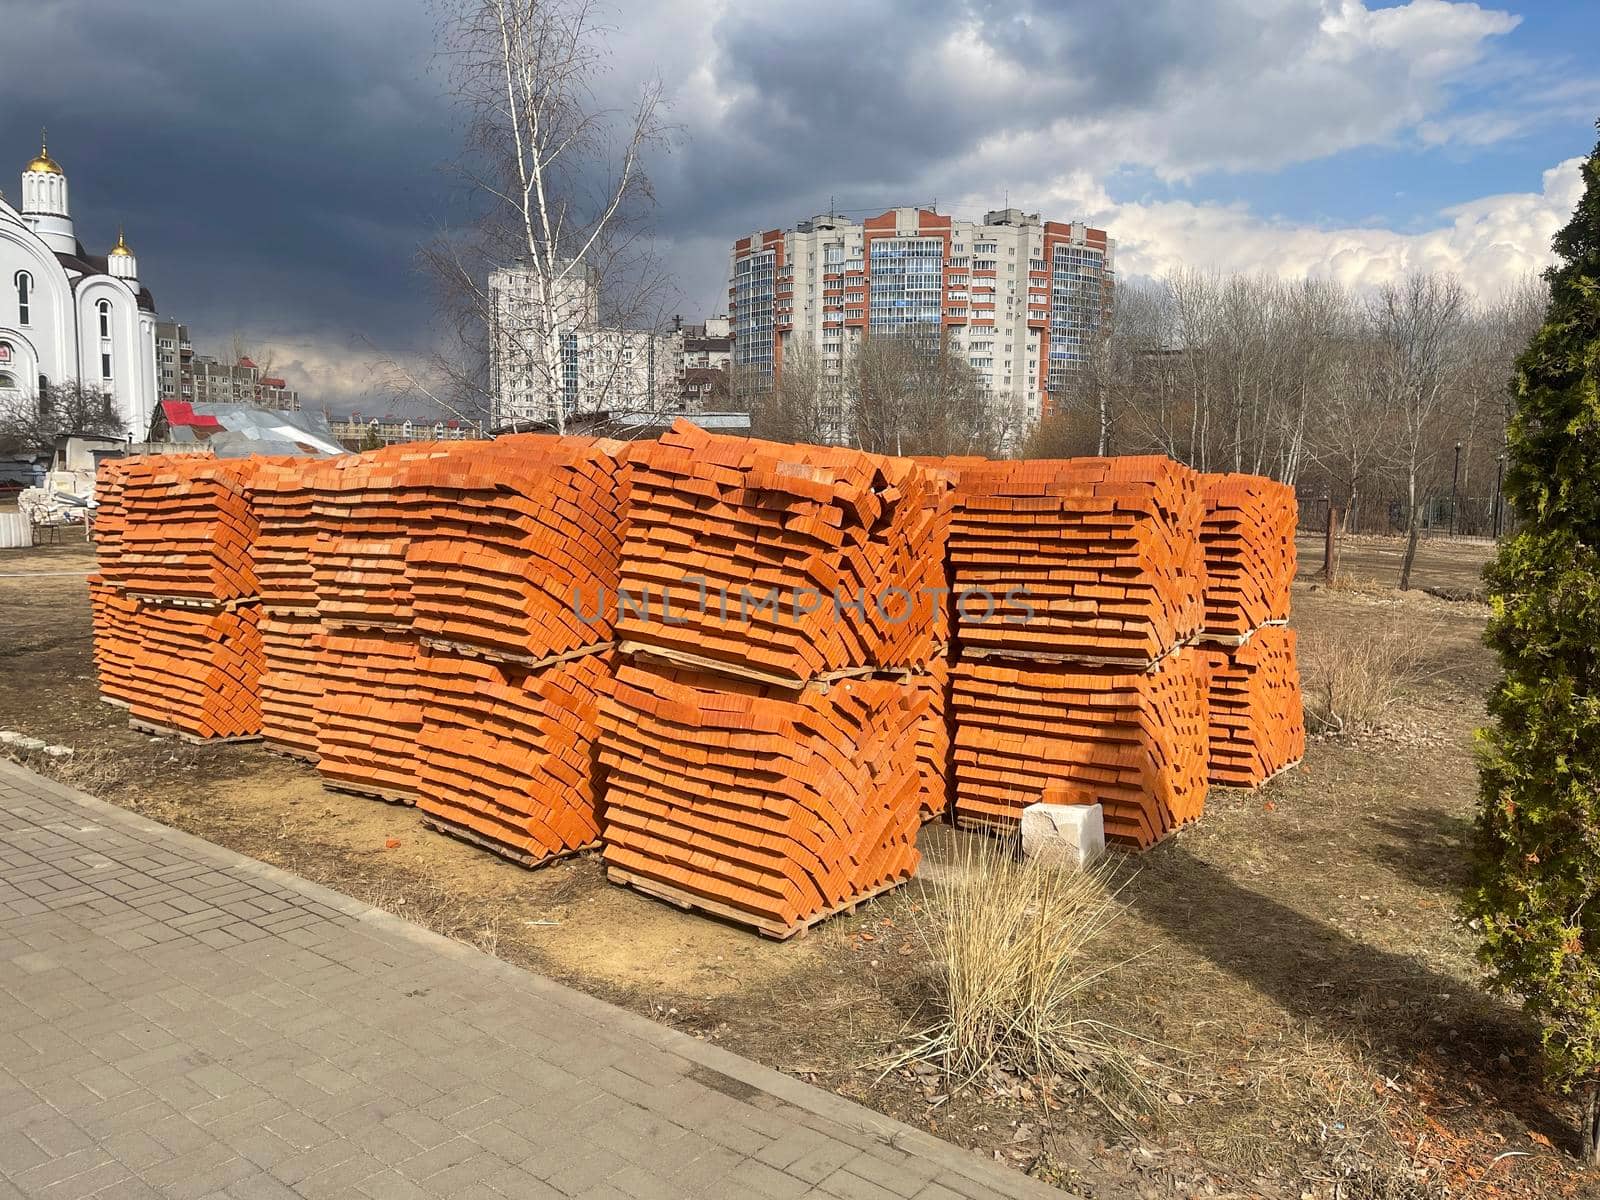 Pile of pallets with red bricks on city street. Building materials on construction site outdoor. Concept of constructing buildings